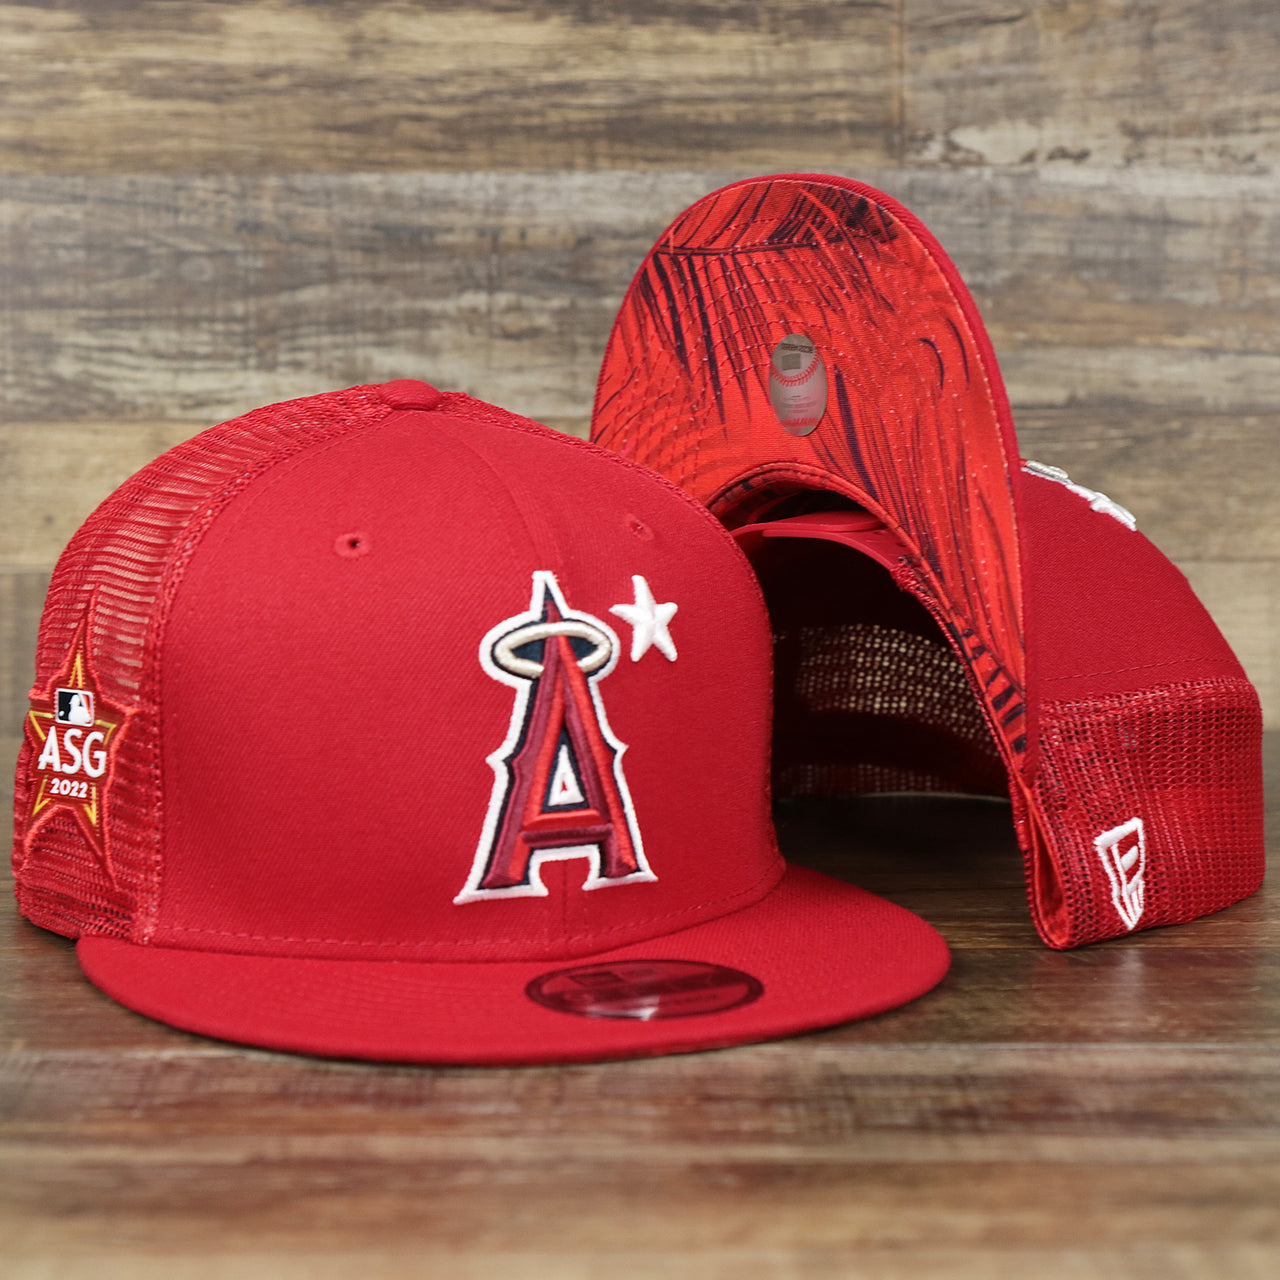 The Youth Anaheim Angels MLB 2022 All Star Game Mesh Back 9Fifty Snapback Cap | ASG 2022 Red Trucker Hat